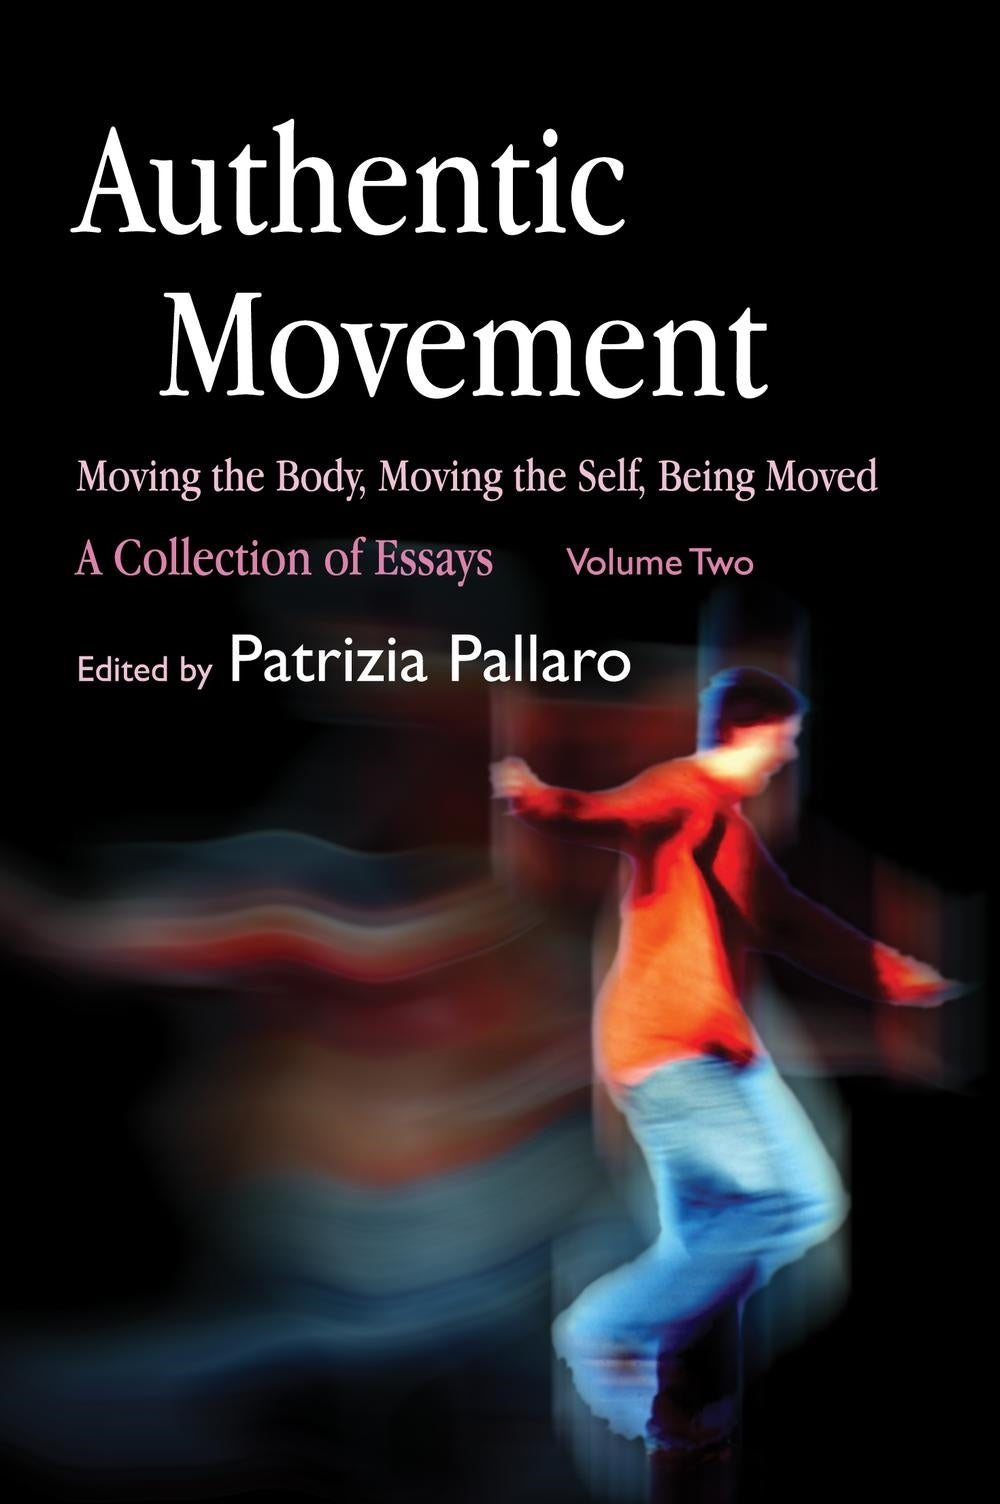 Authentic Movement: Moving the Body, Moving the Self, Being Moved by Patrizia Pallaro, No Author Listed